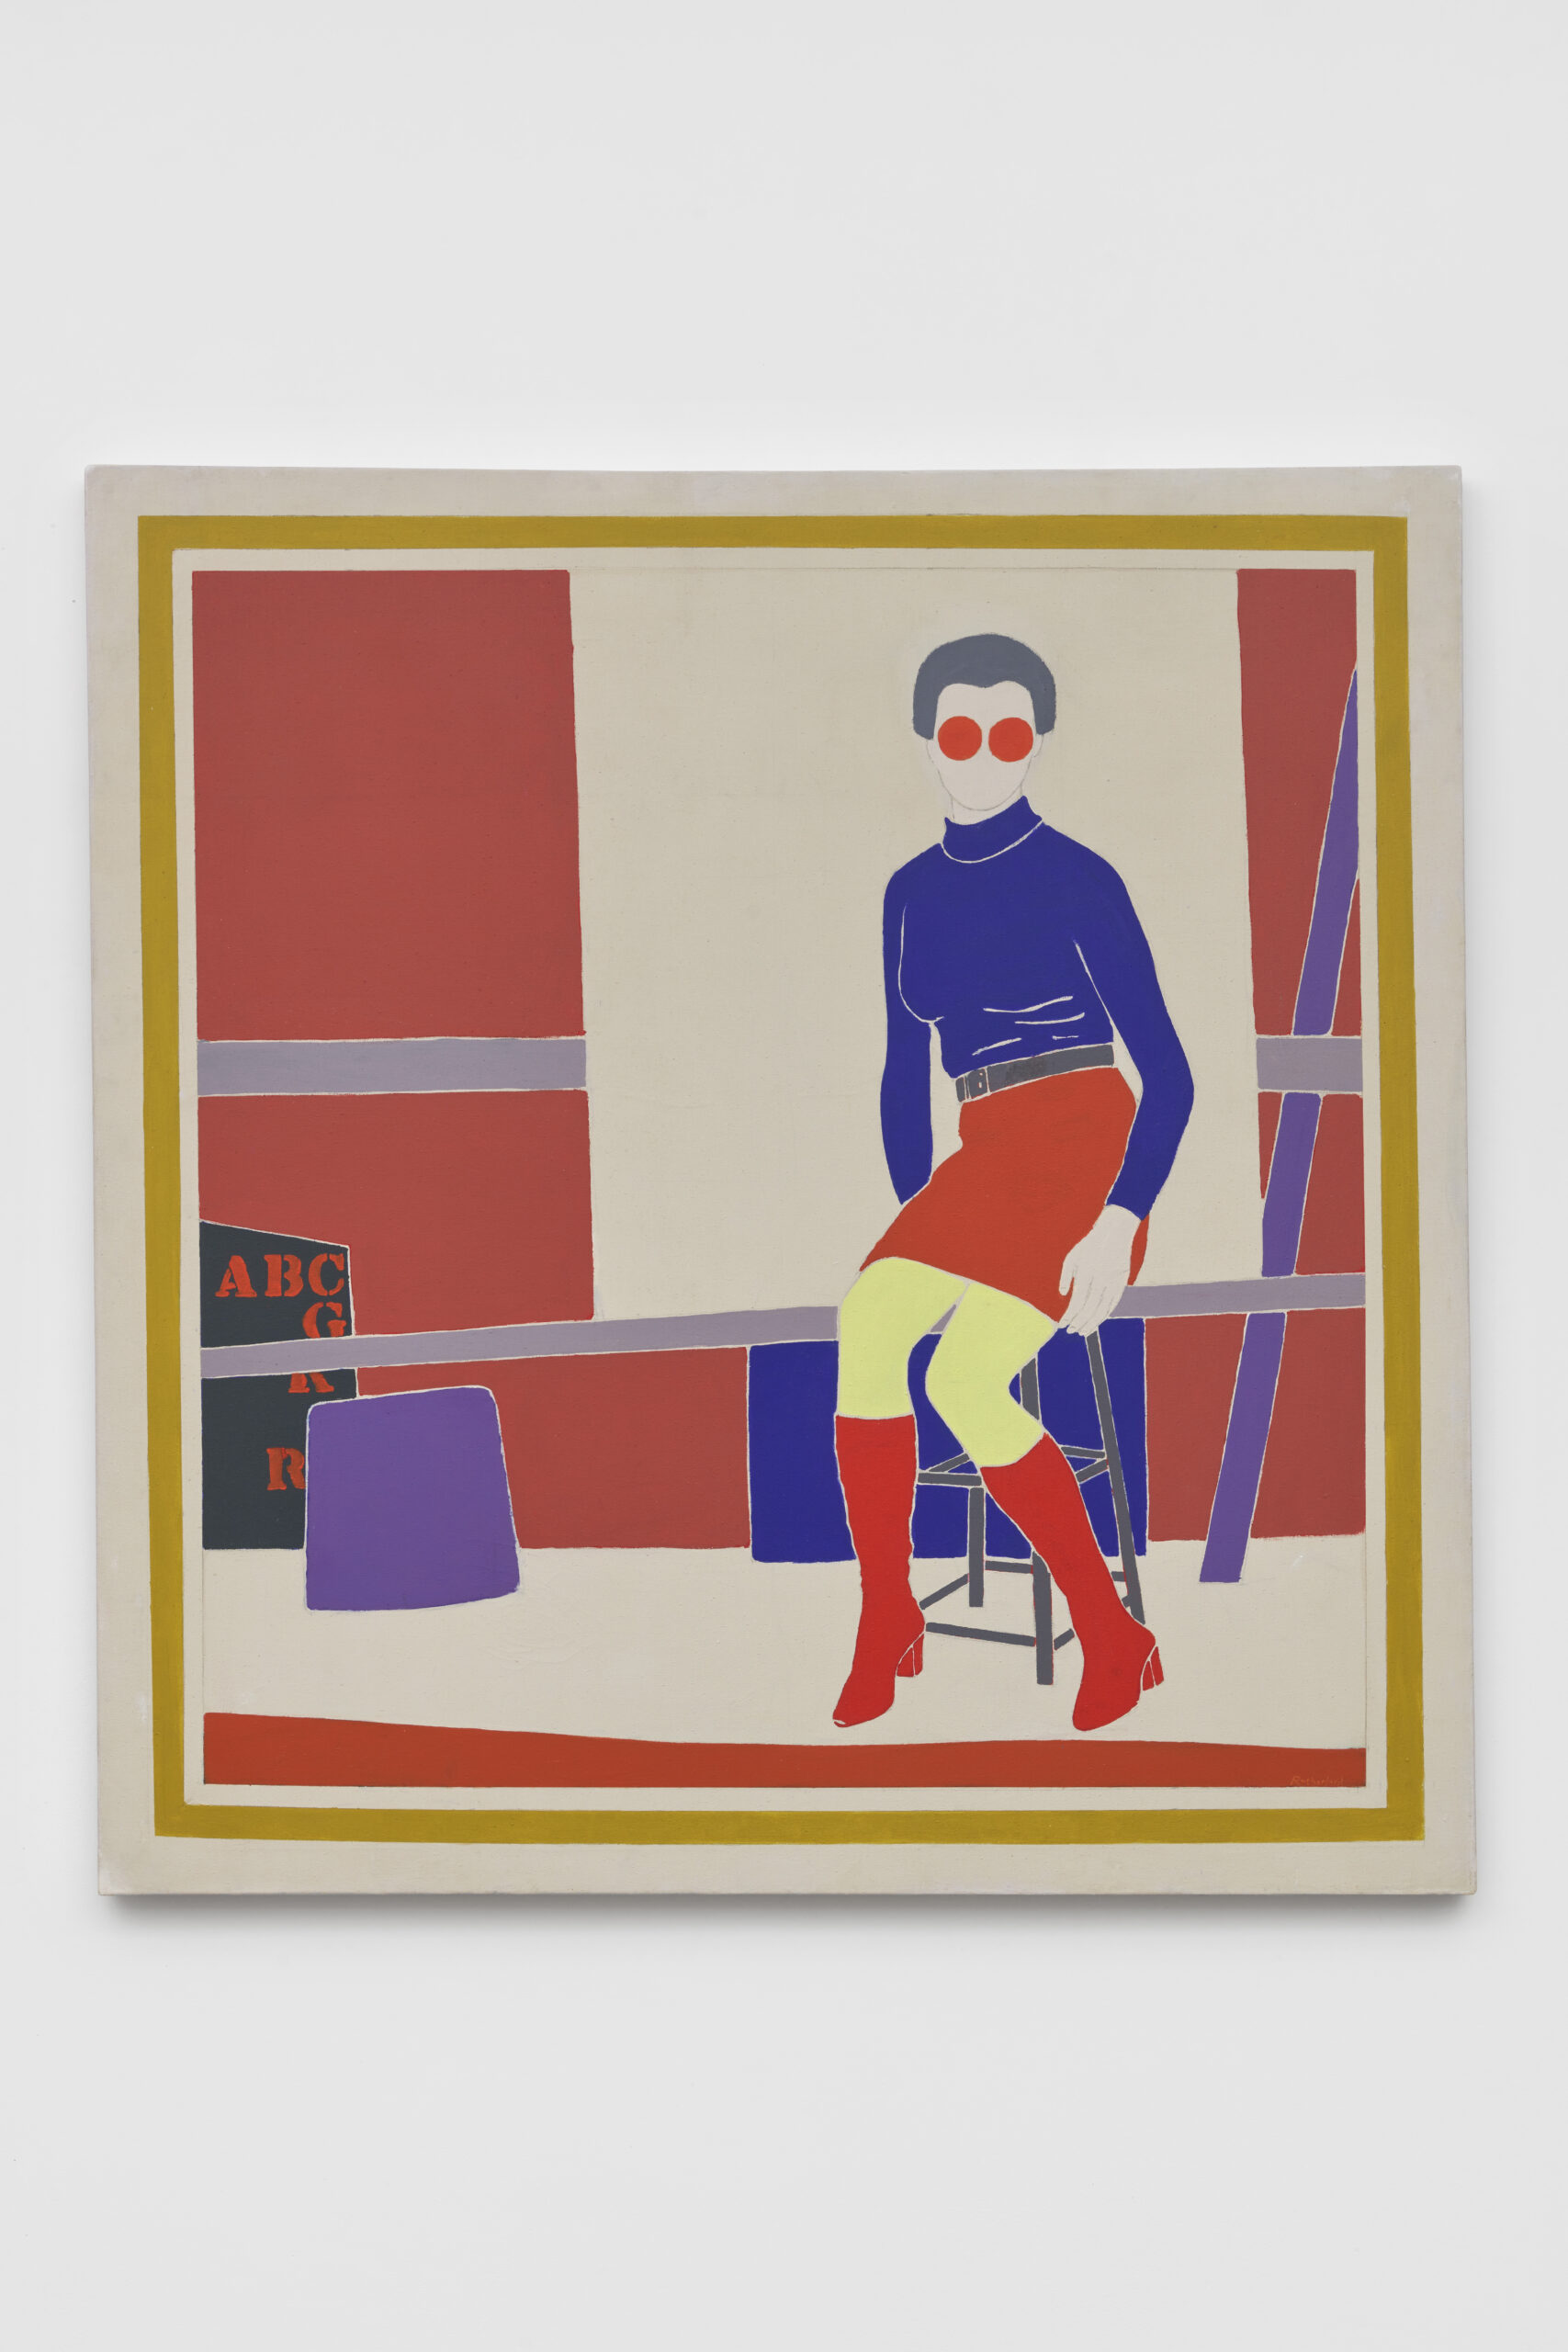 Erica Rutherford (Edinburg, United Kingdom, 1923 – 2008, Charlottetown, Canada) Self-Portrait with Red Boots (1974) Acrylic on canvas 137.2 x 132.1 cm © The Estate of Erica Rutherford / Courtesy of the Collection of Beth Rudin DeWoody